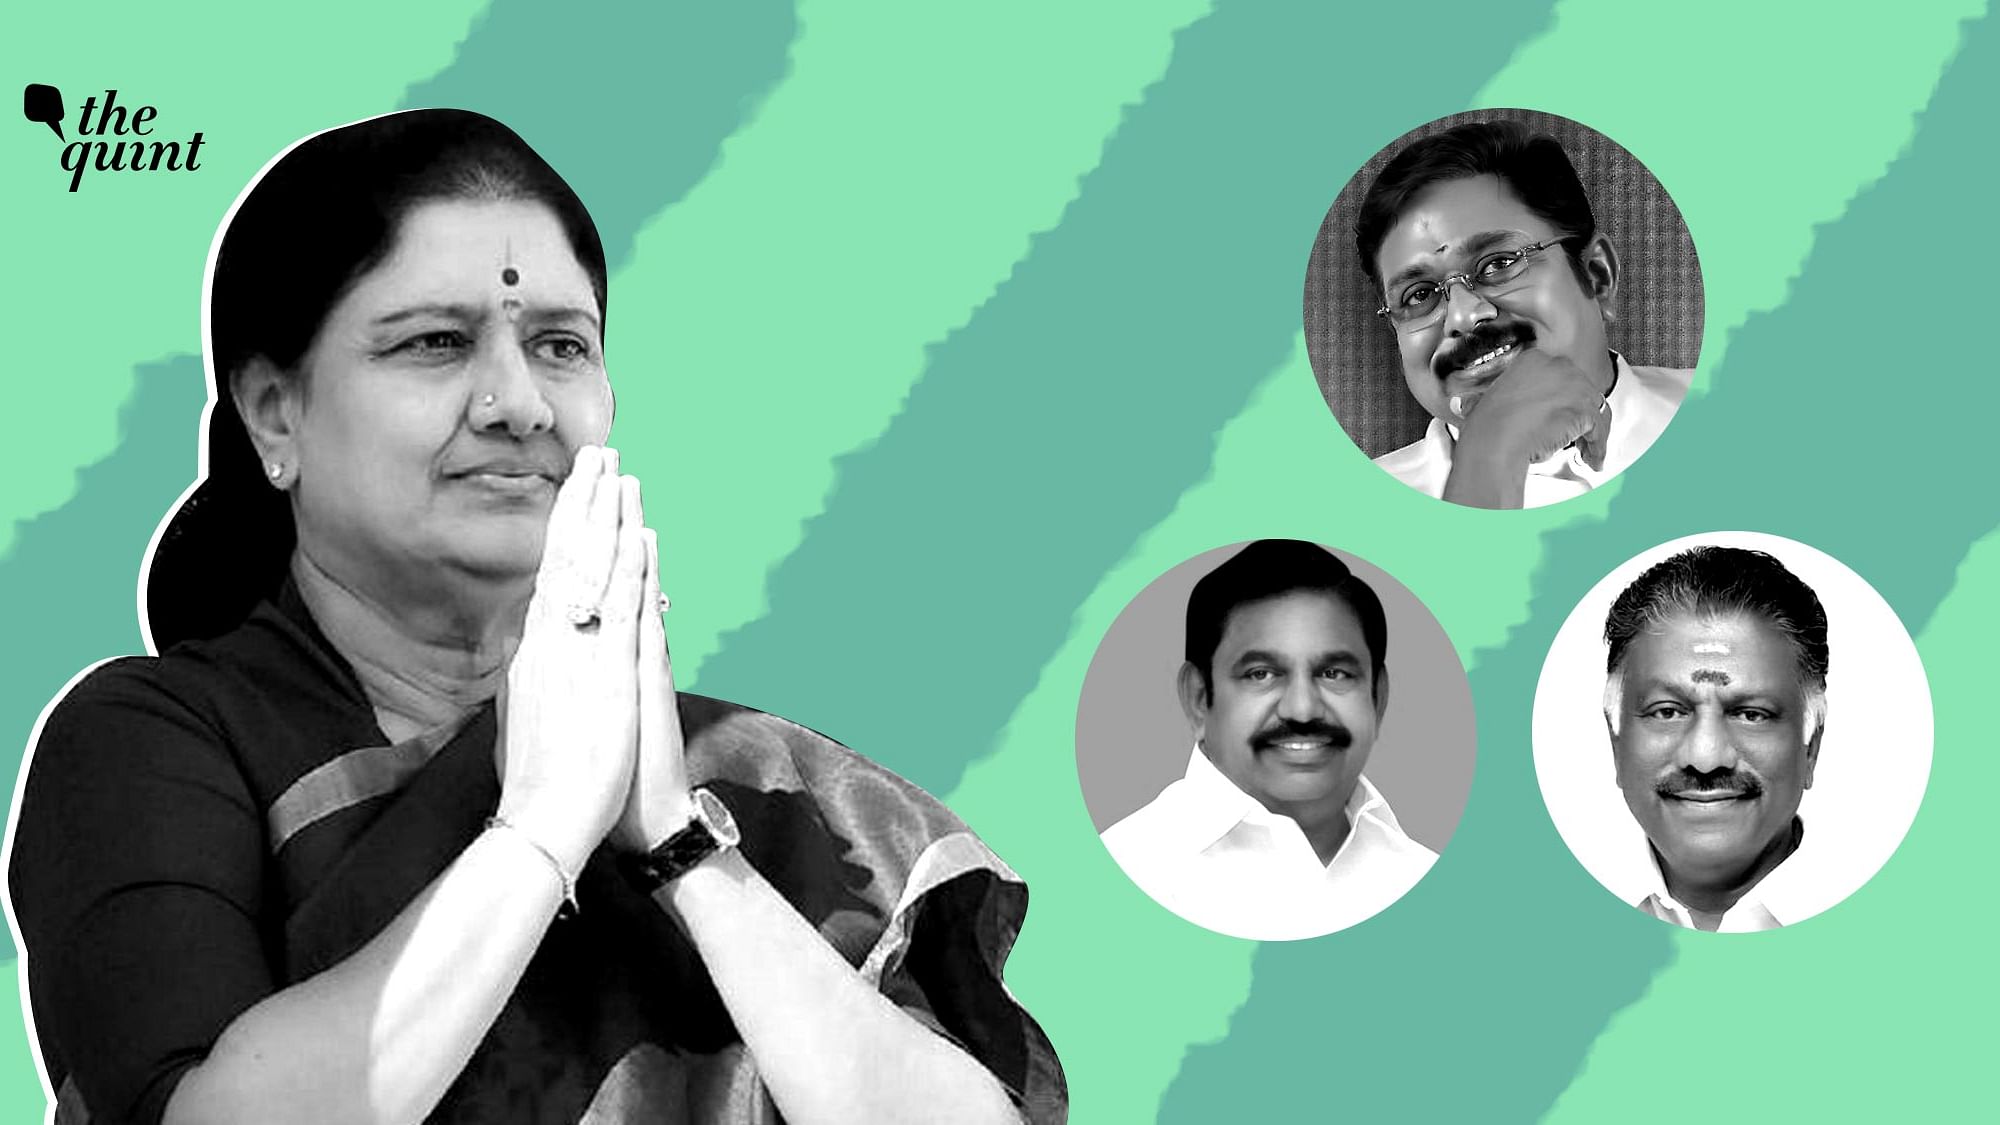 Sasikala who was  released from a Bengaluru prison on 27 January had said that she will be in active politics. But on 3 March she decided to quit politics and public life.